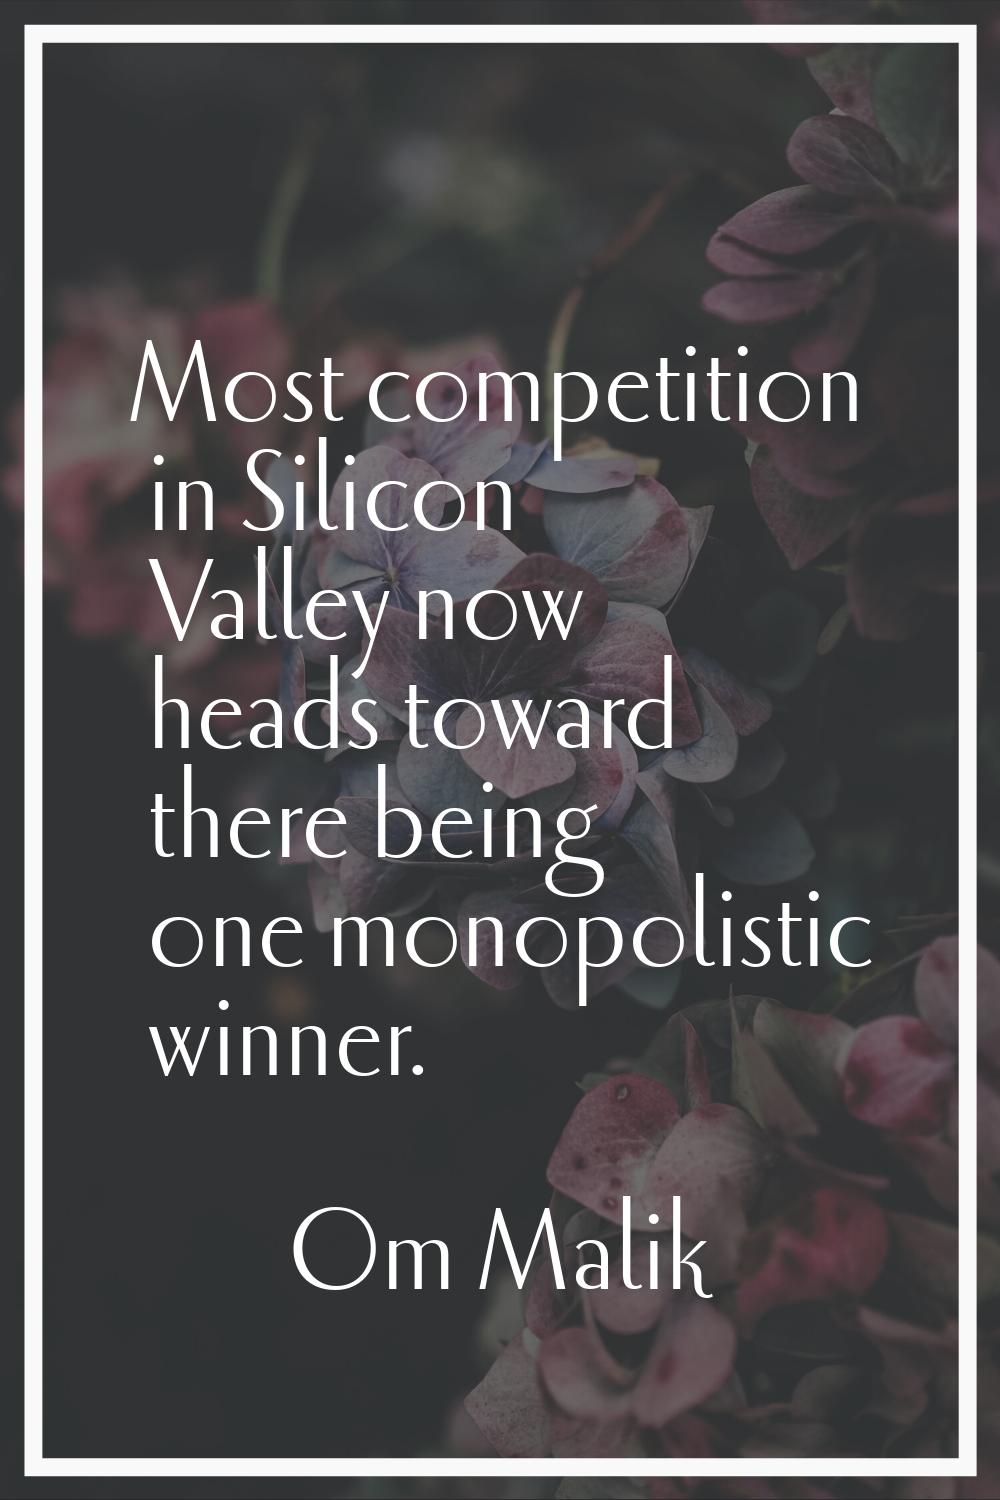 Most competition in Silicon Valley now heads toward there being one monopolistic winner.